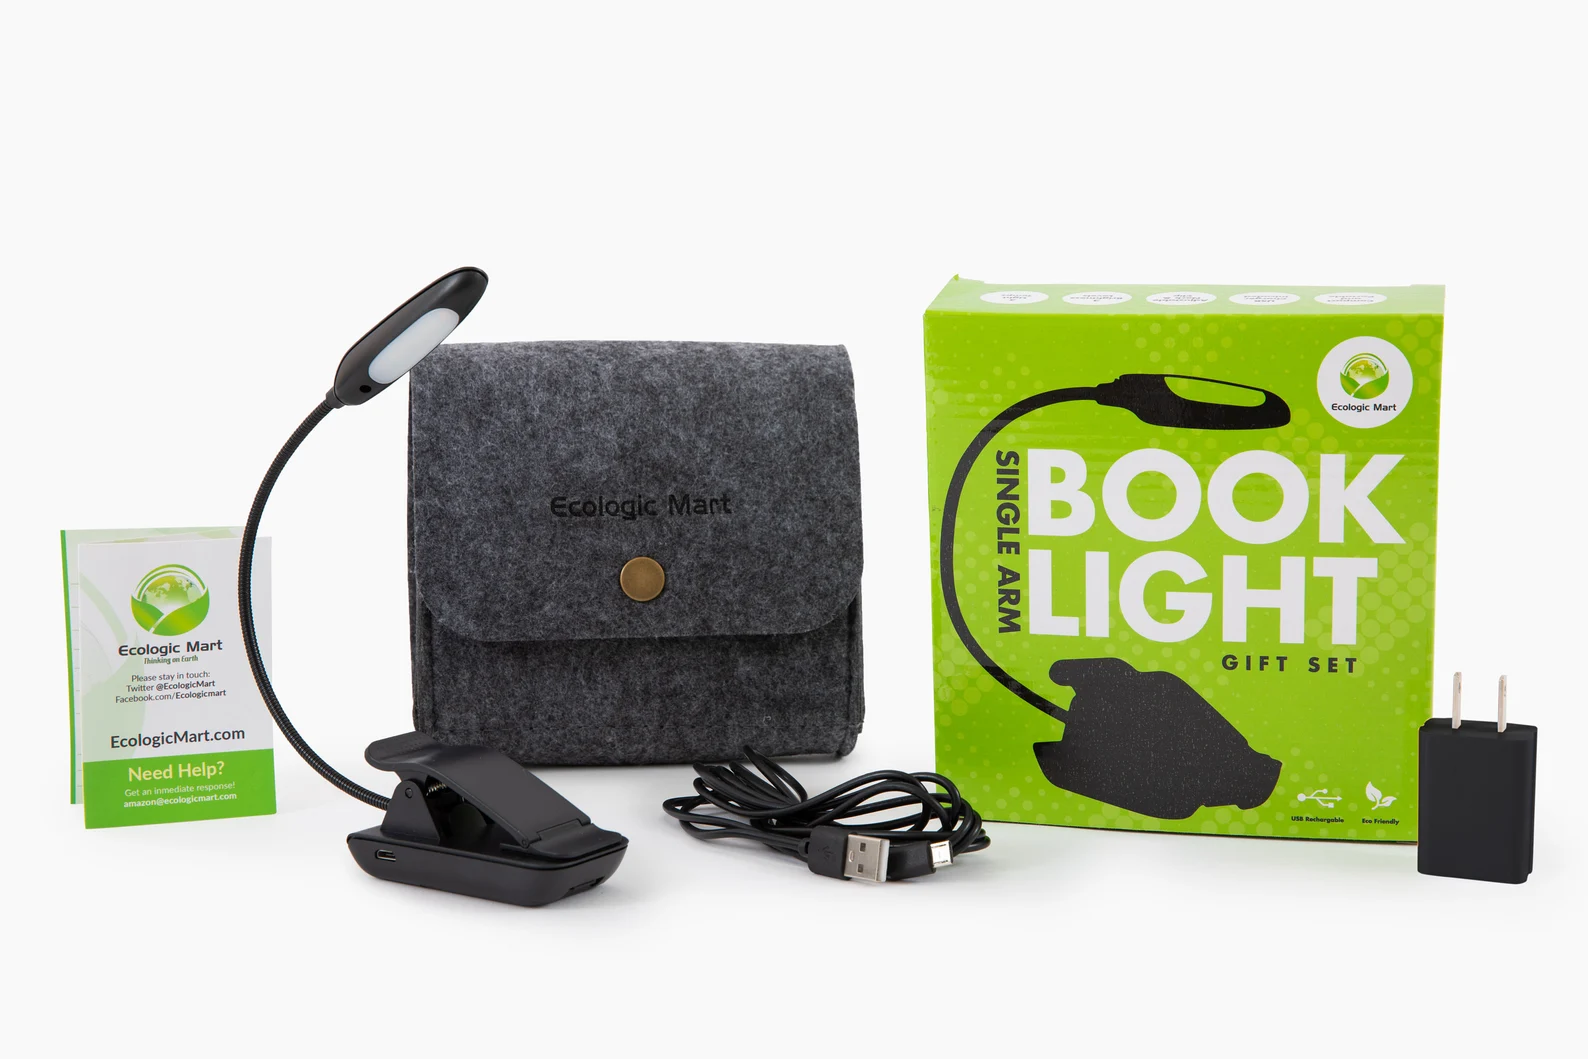 image of a book light kit